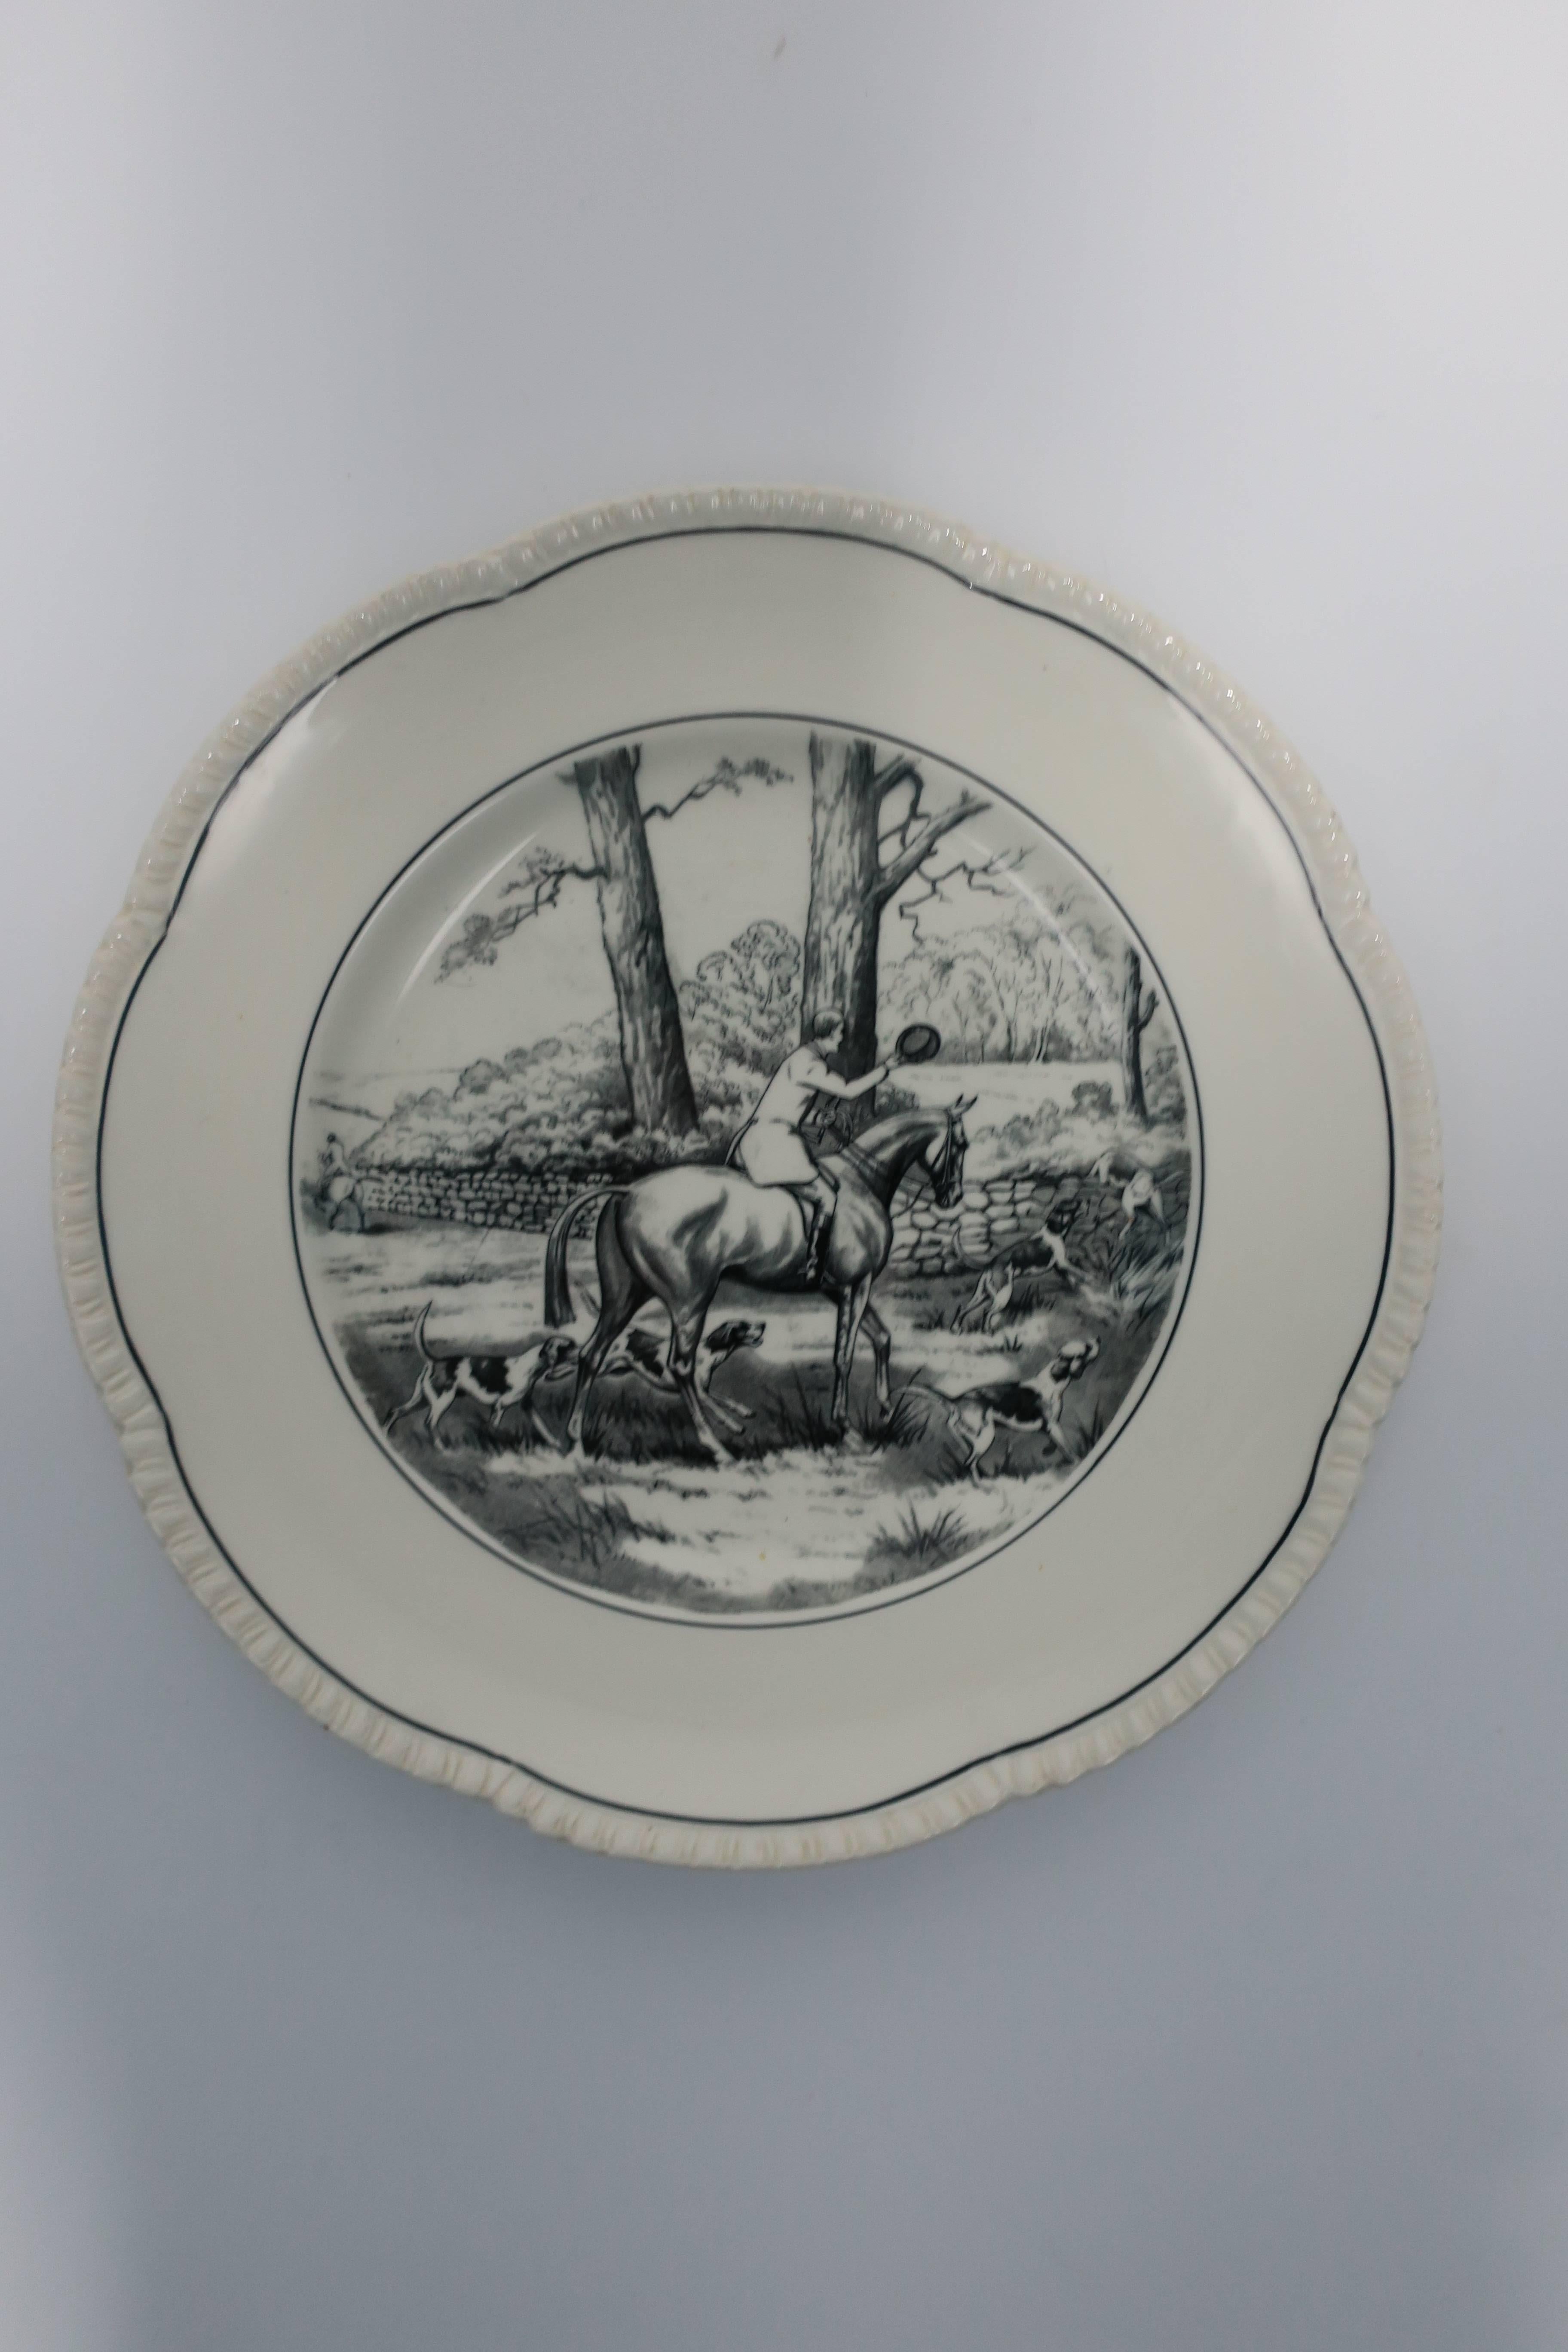 Black and Whtie English Horse or Equine Porcelain Plate or Wall Art In Good Condition For Sale In New York, NY